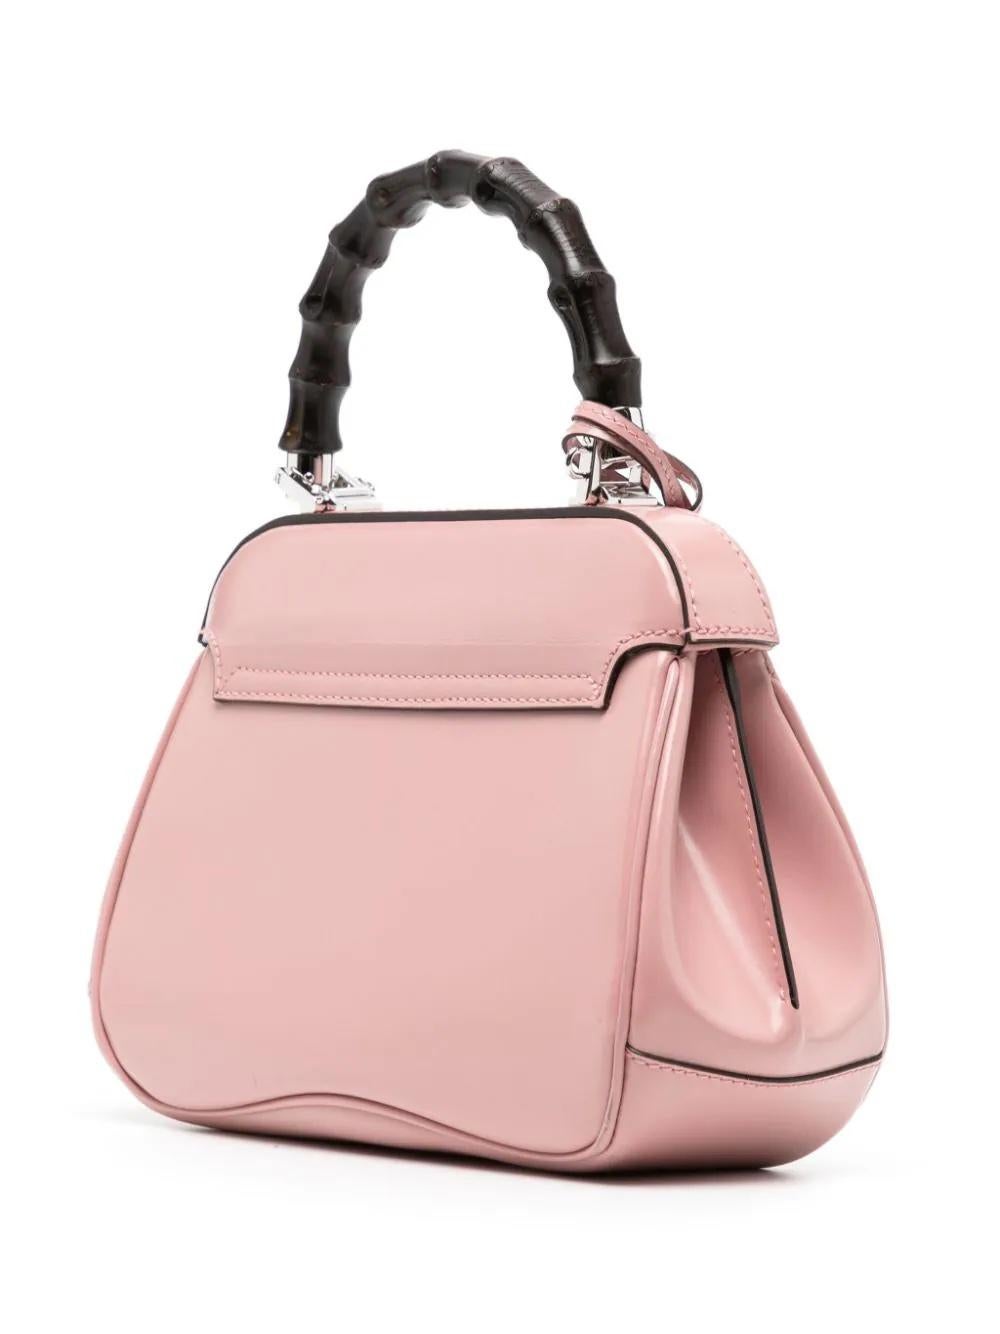 * Pink
* Leather
* Signature bamboo top handle
* Detachable shoulder strap
* Foldover top
* Push-lock fastening
* Main compartment
* Internal slip pocket
* Leather tag
* Silver-tone hardware
* Very Good Condition: This pre-loved item is in very good